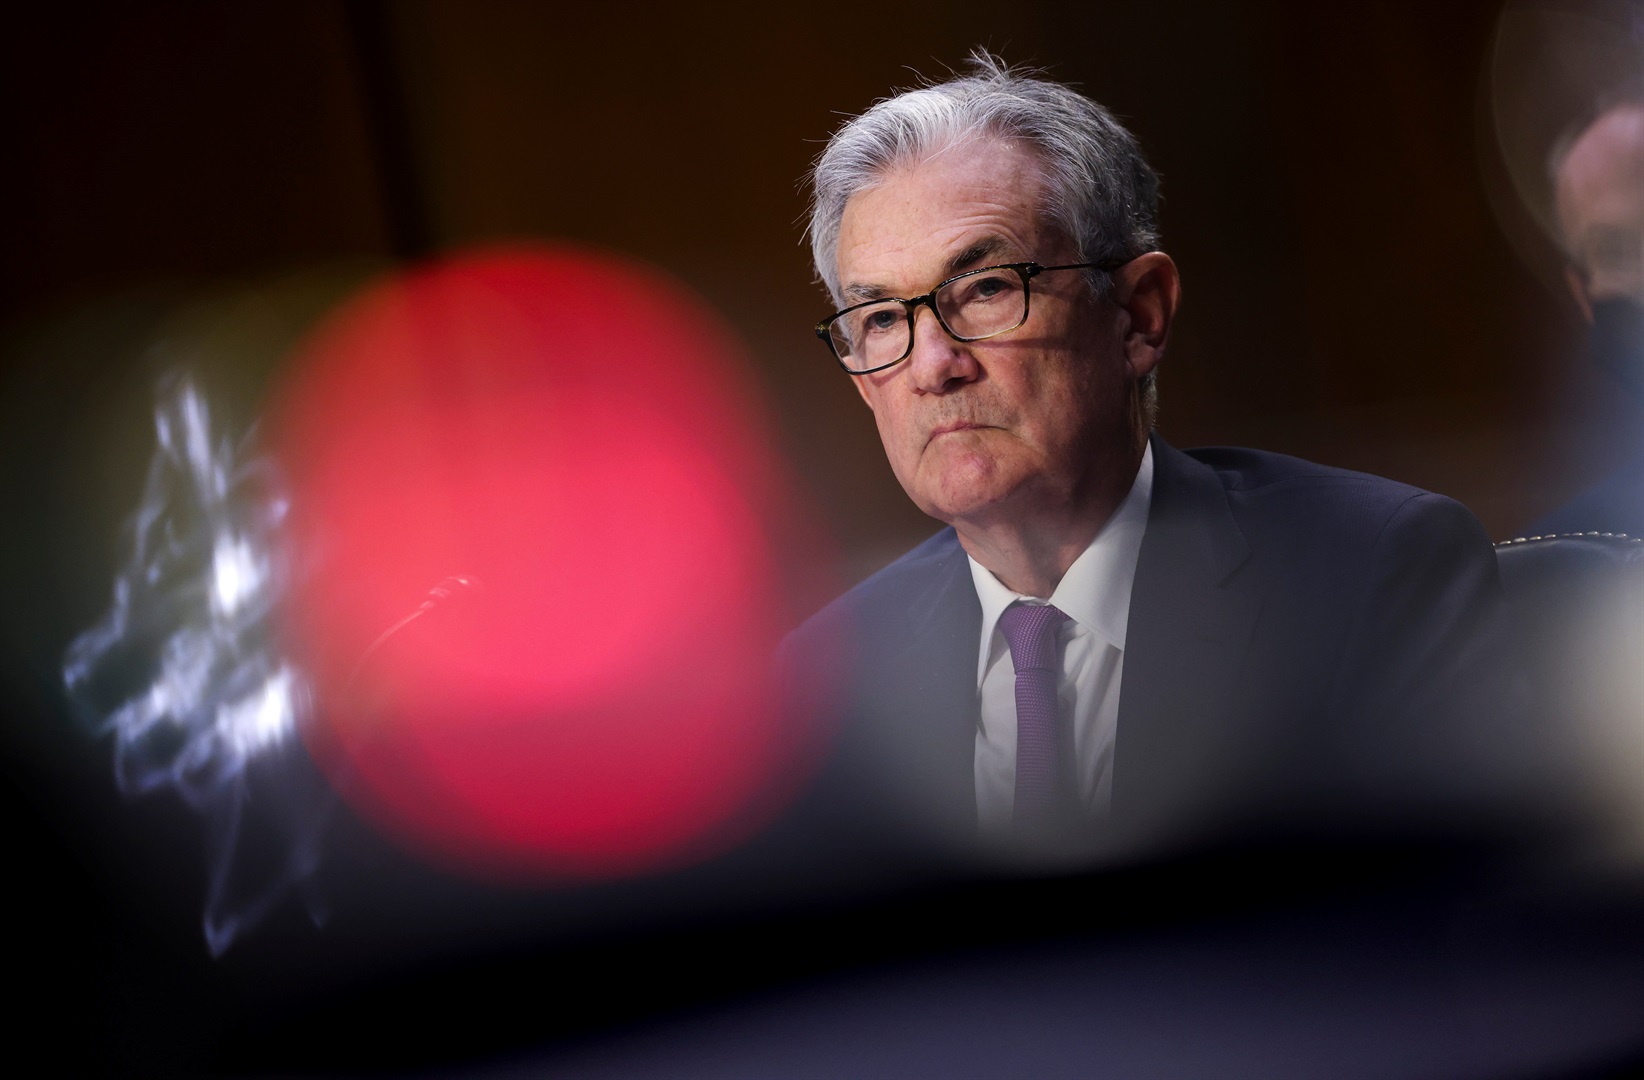 Jerome Powell announced Wednesday that the Federal Reserve will raise interest rates by 75 basis points - its largest hike since 1994.